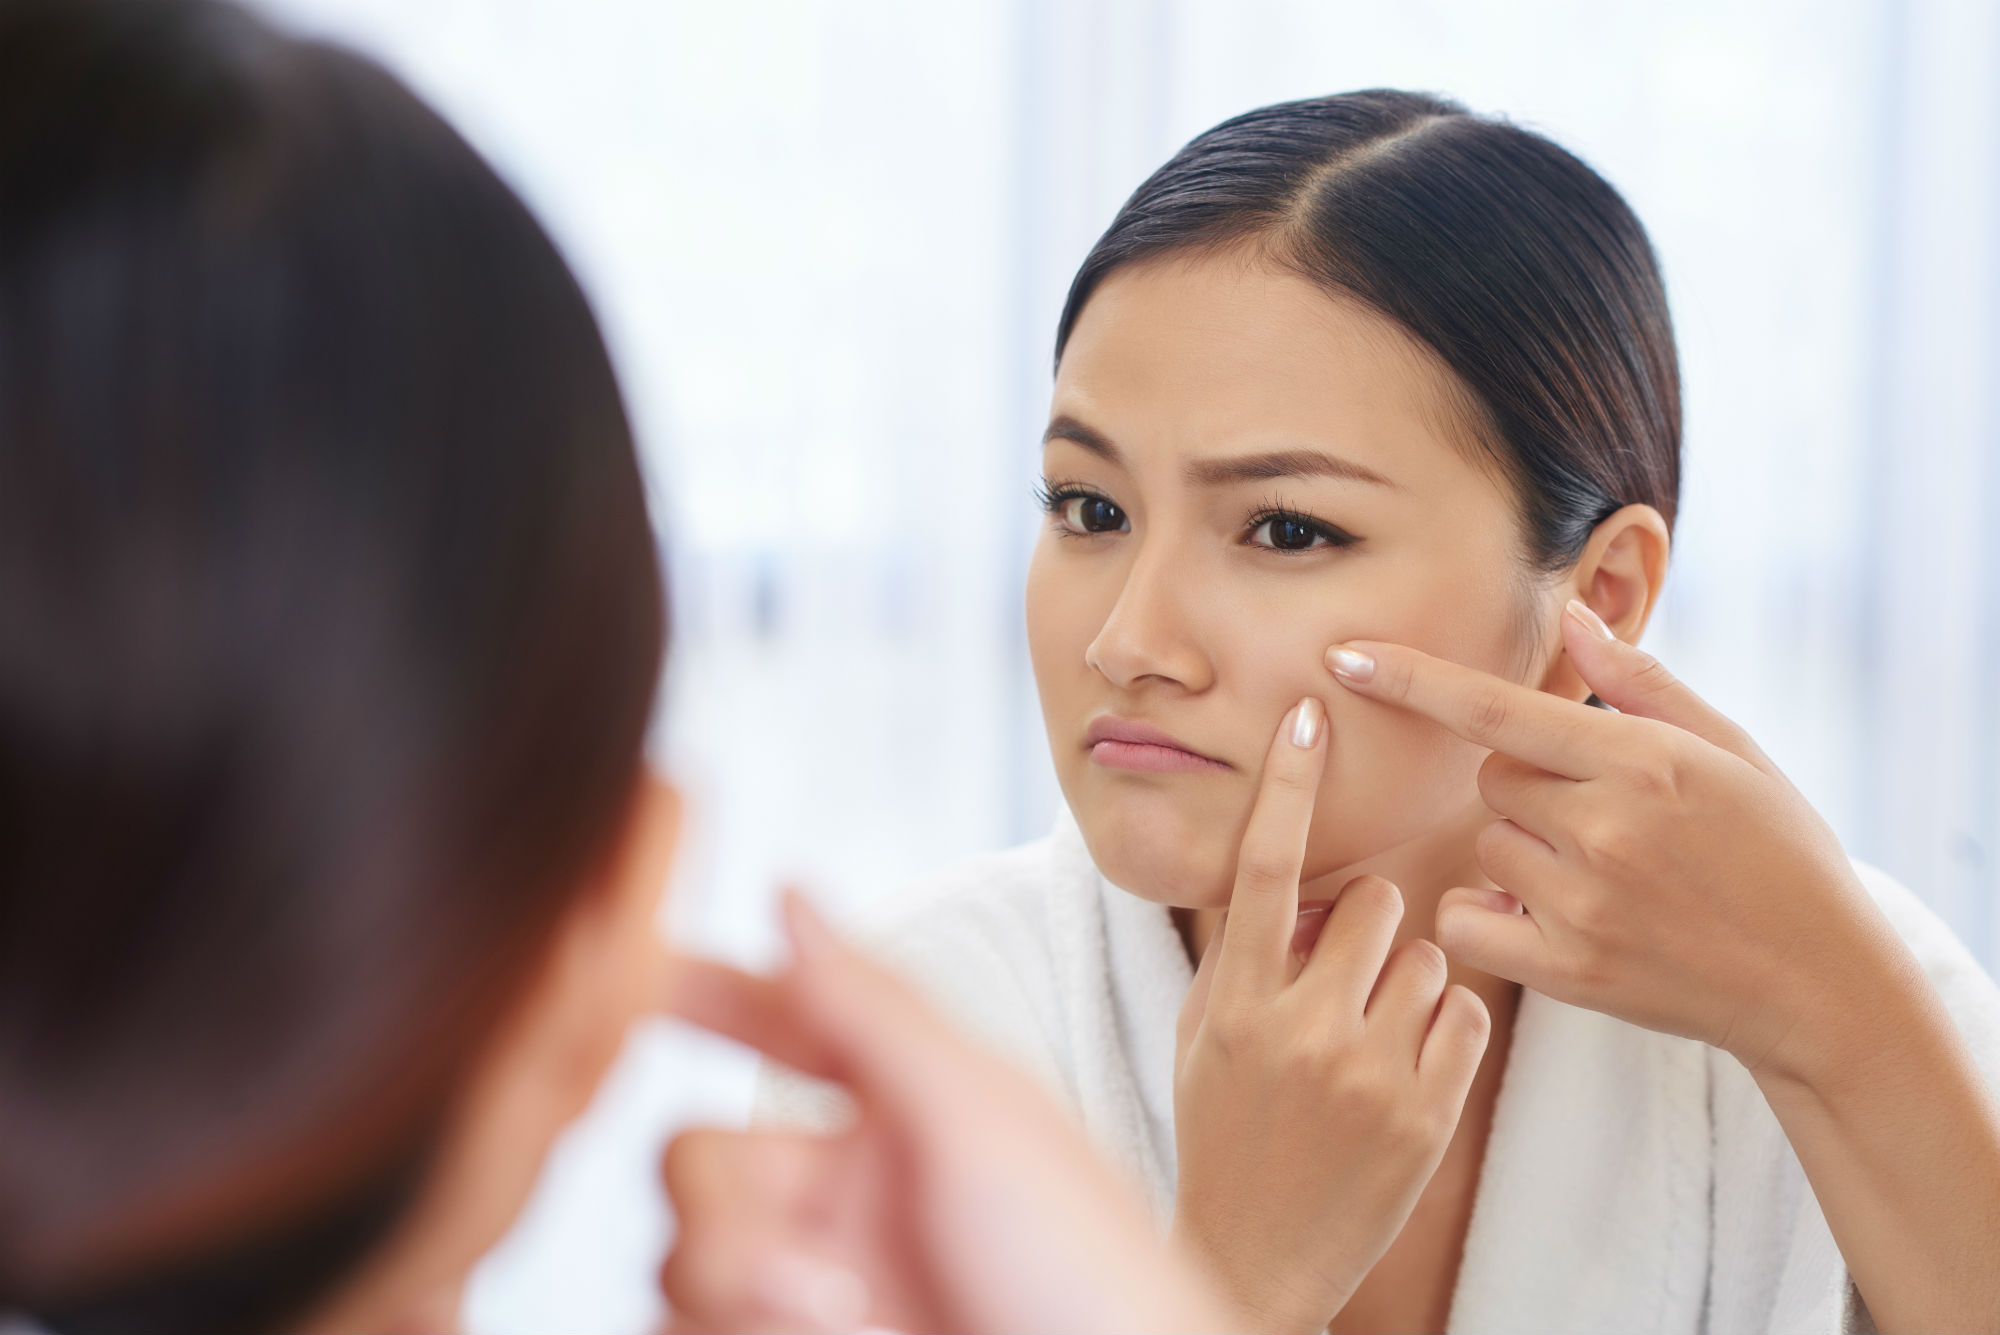 4 Habits That Can Make Your Acne Scars Worse